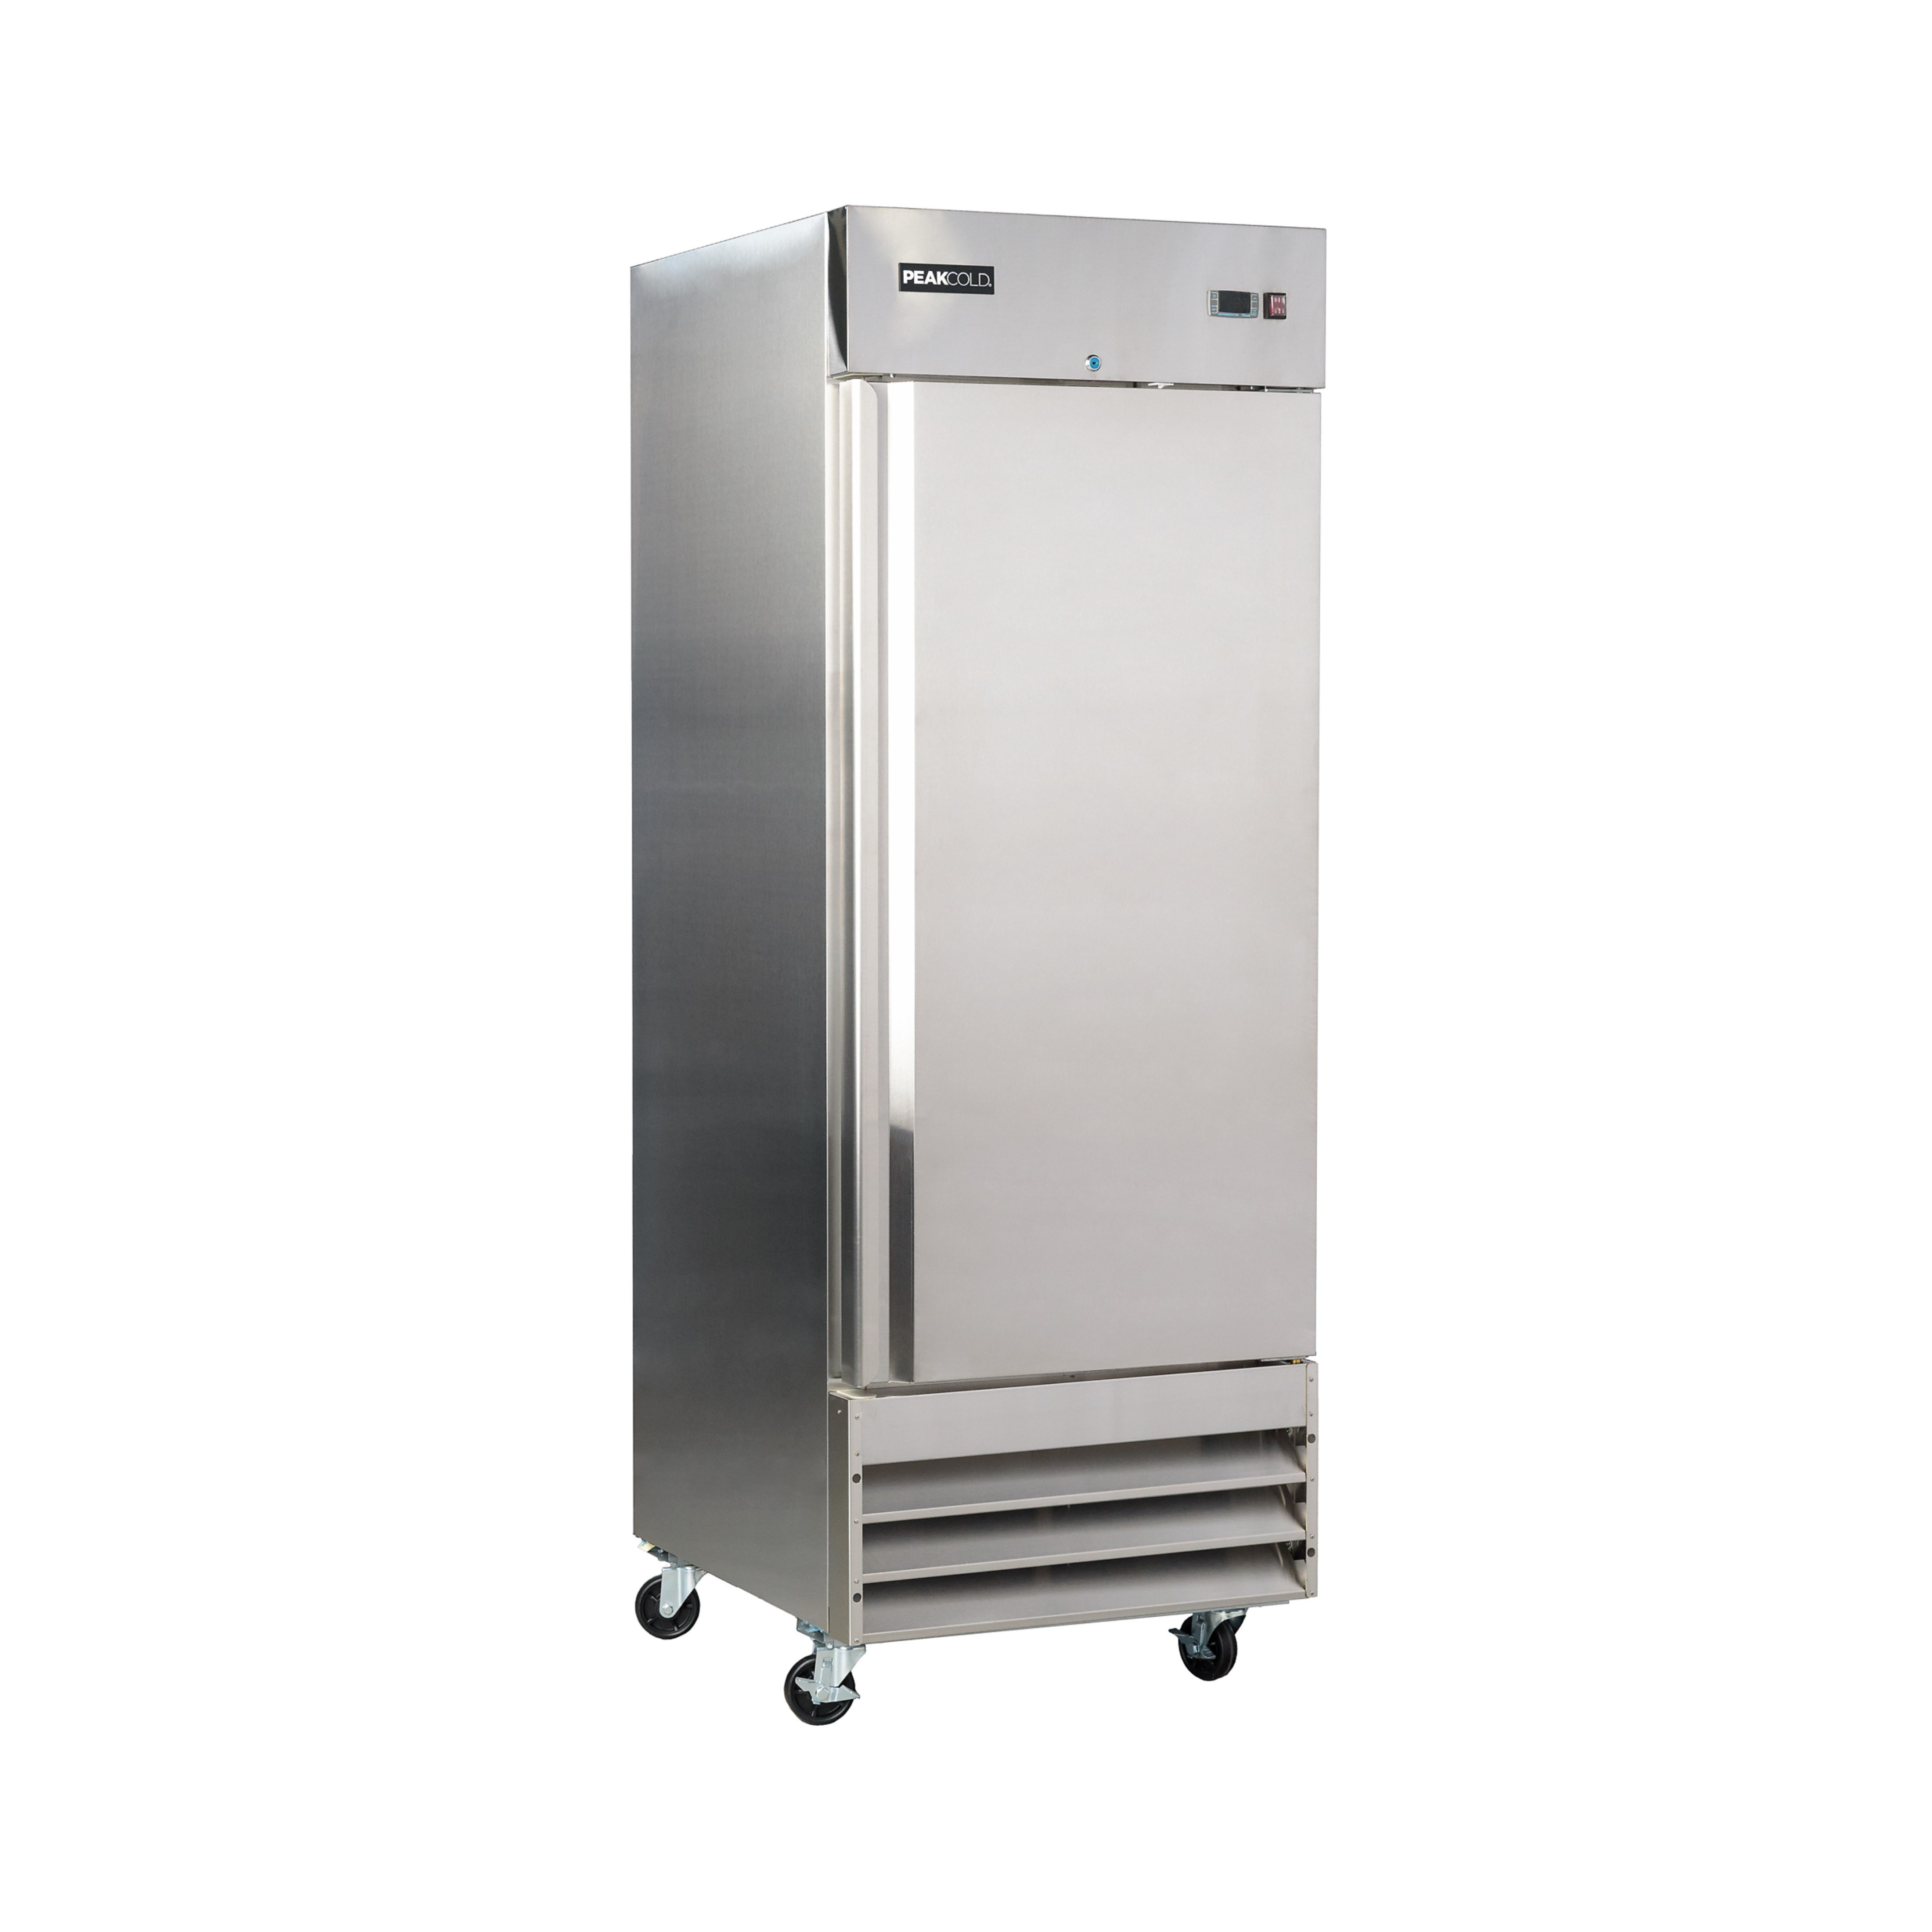 CFD-1RR Single Door Stainless Steel Commercial Refrigerator